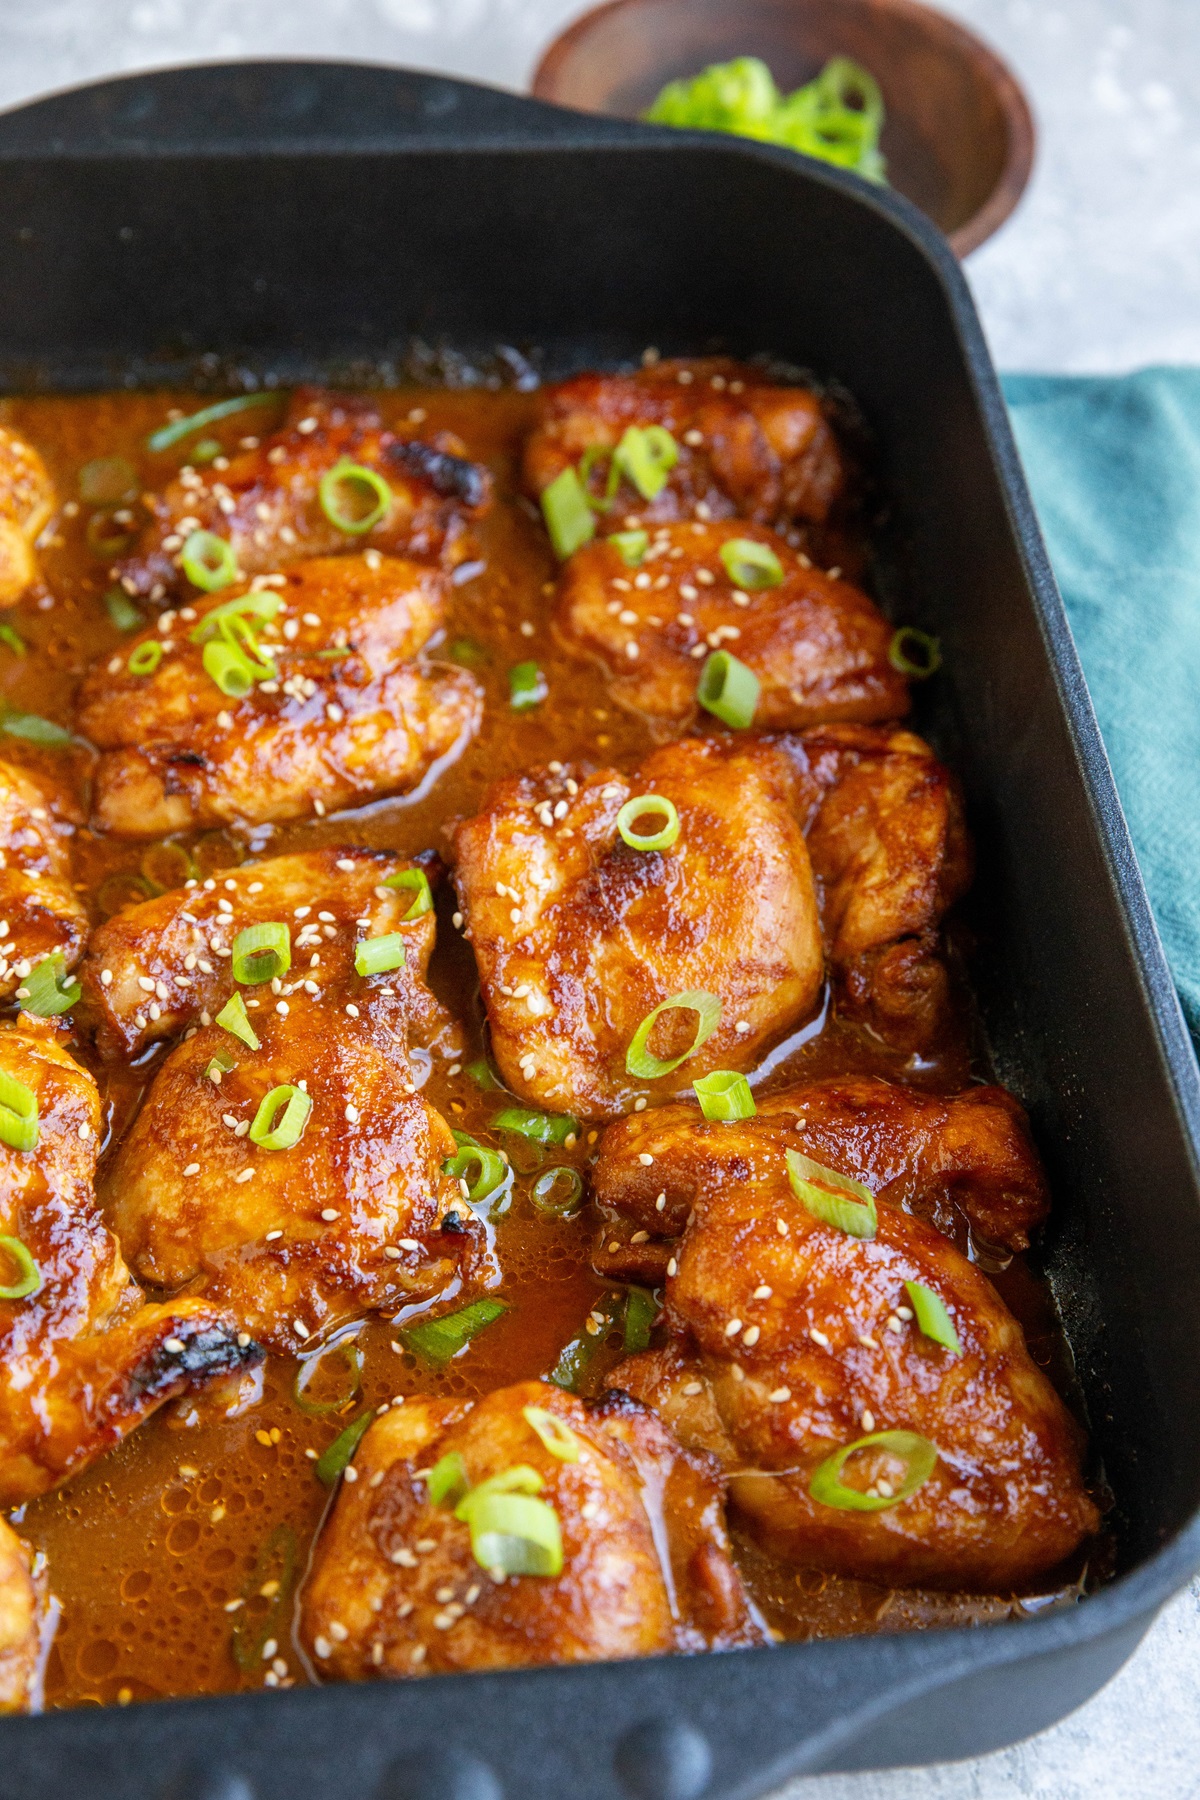 Baking dish with baked chicken thighs inside, drenched in marinade.